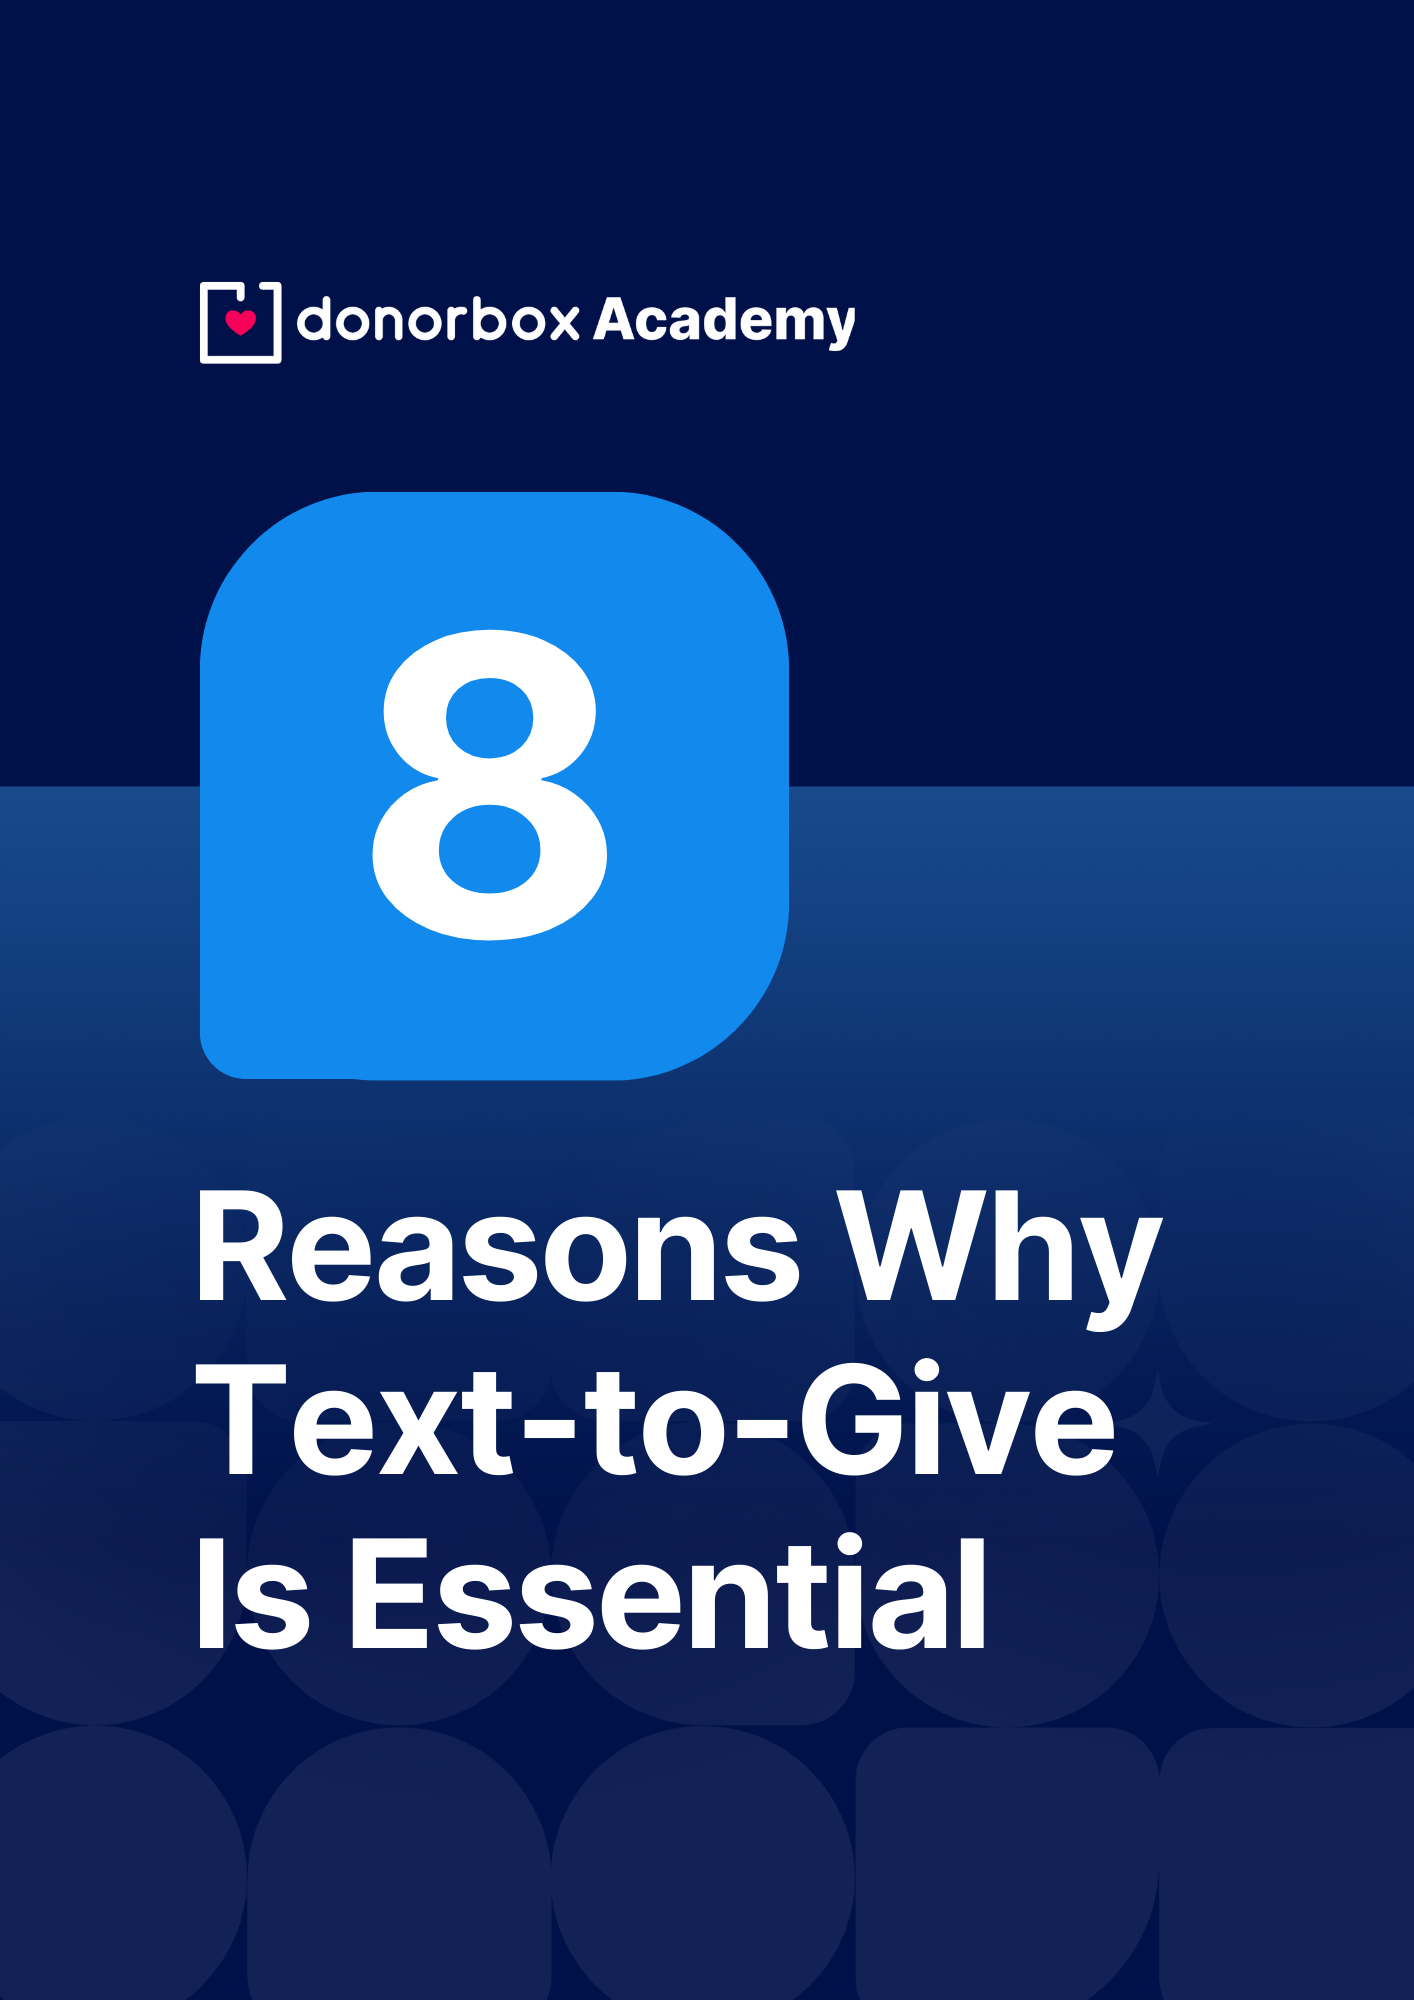 Why Text-to-Give Is Essential